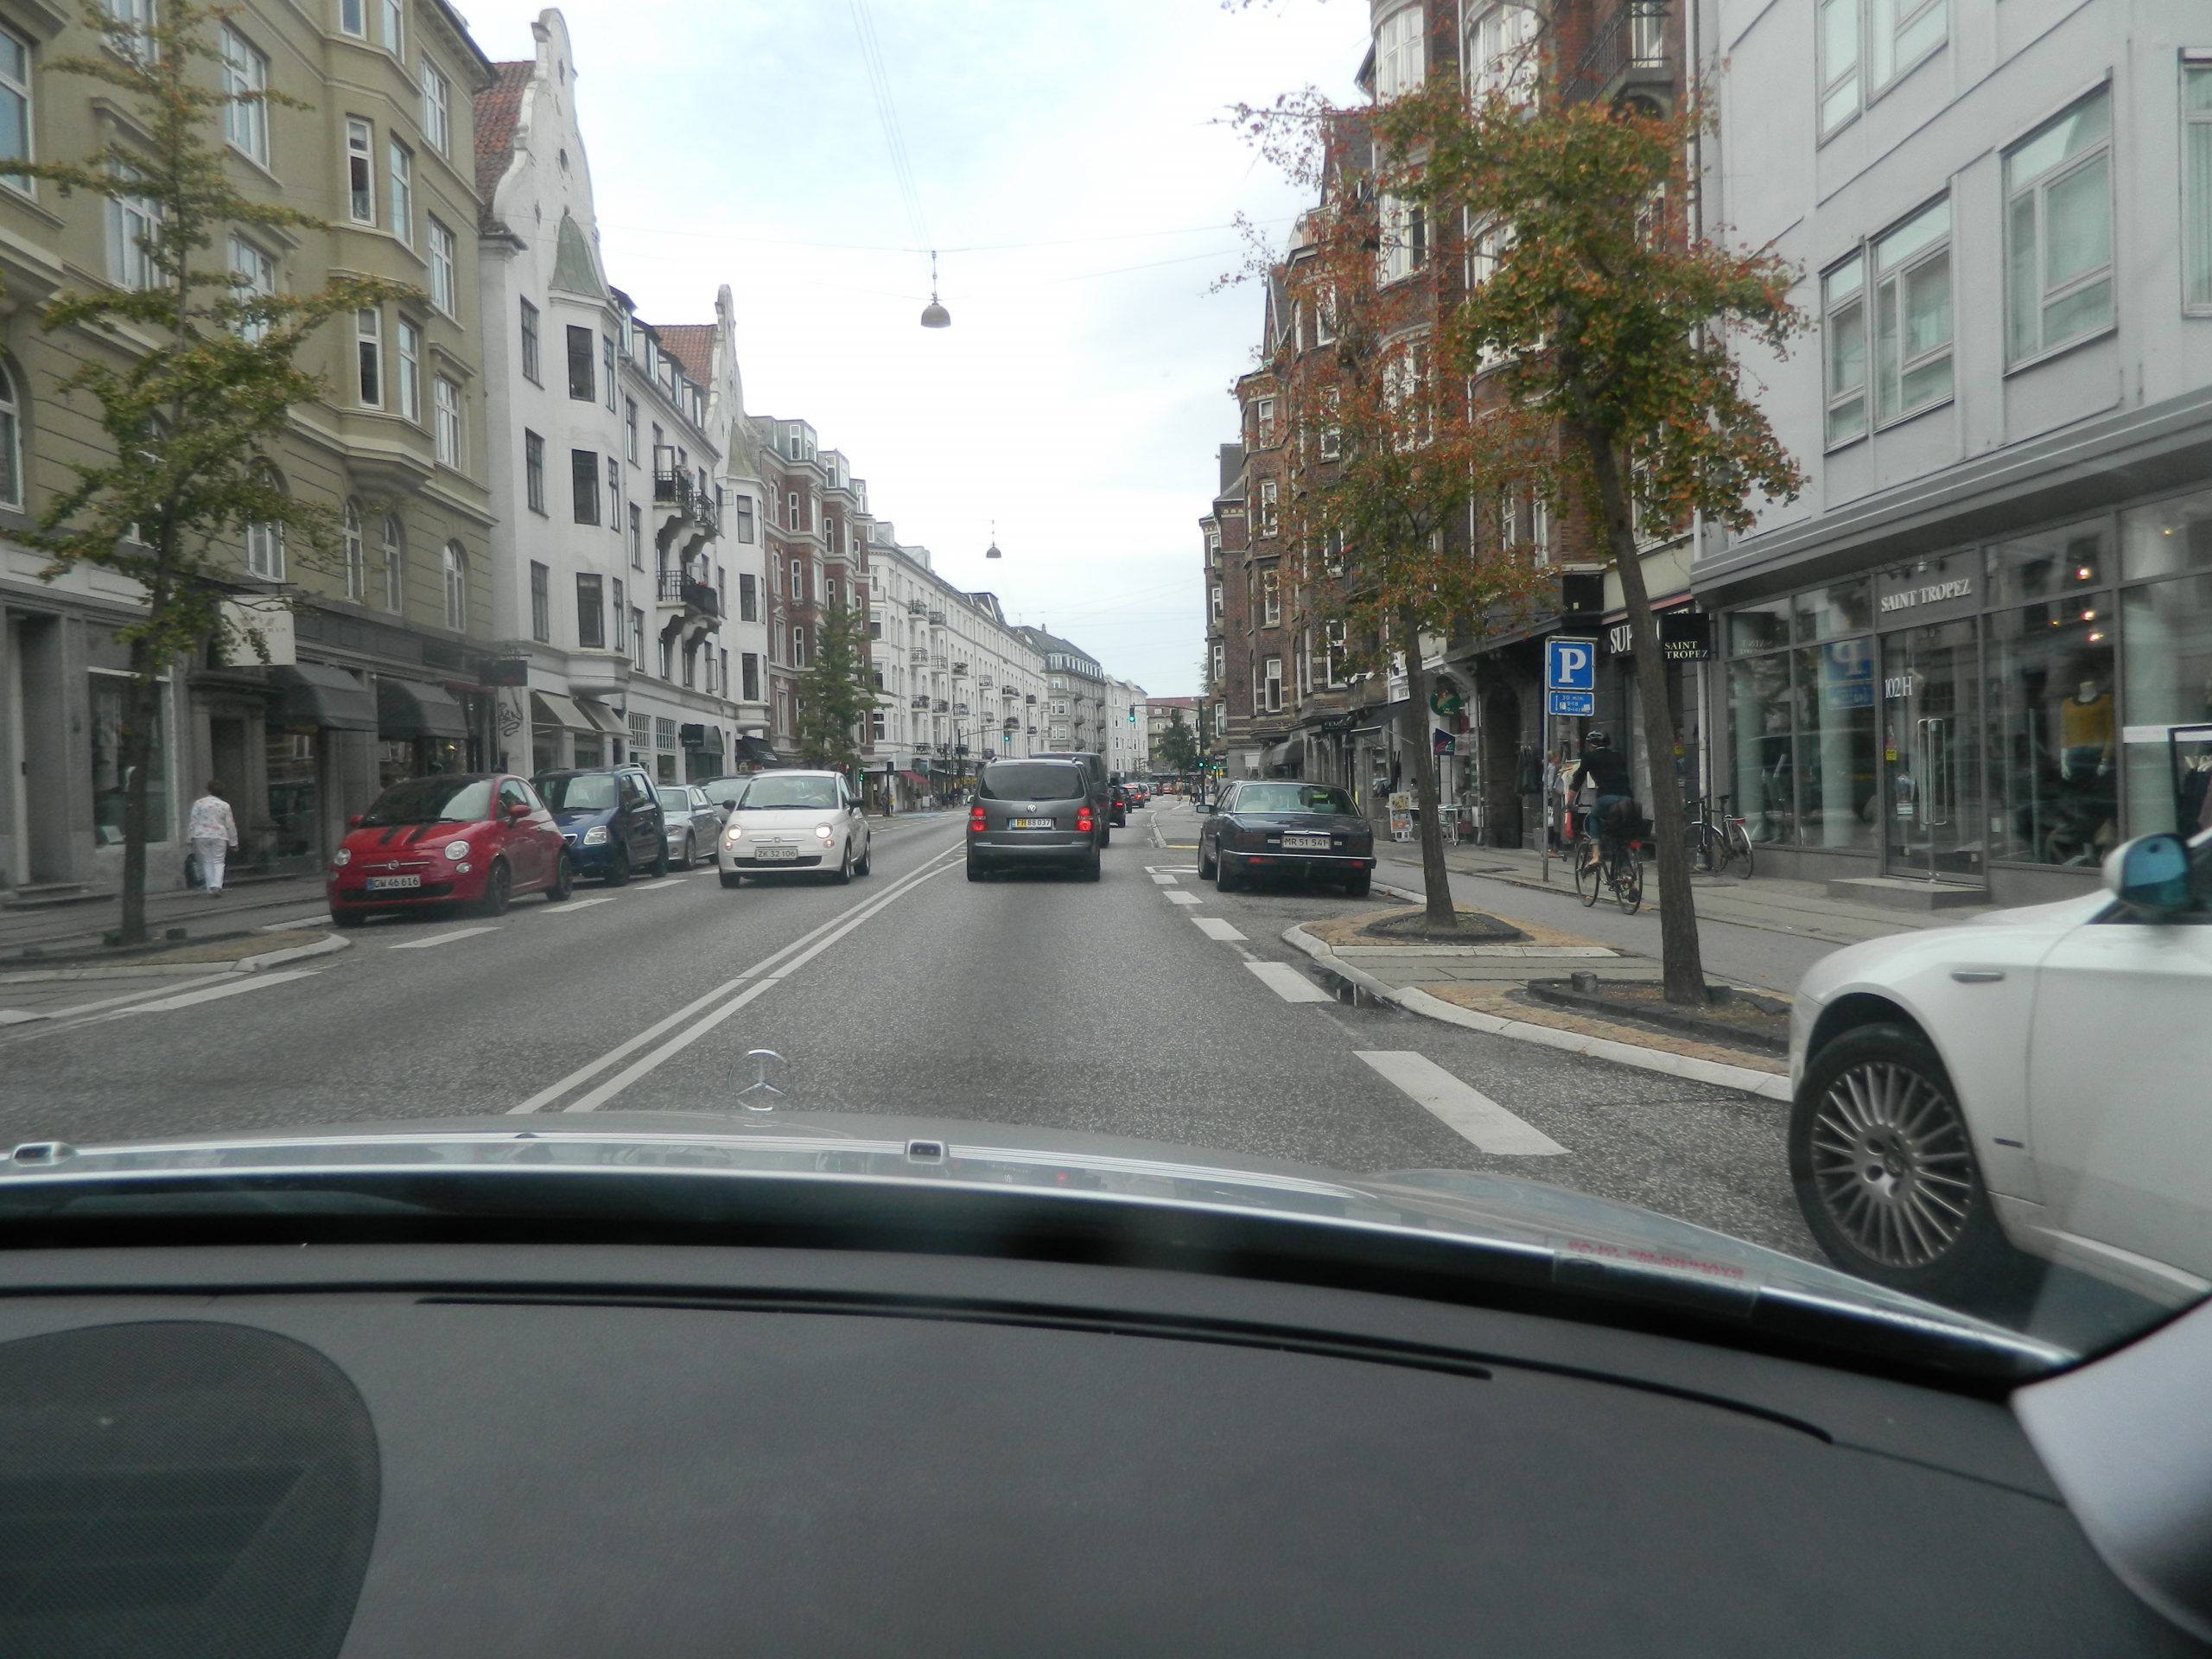 Local Round-Up: A few surprises among the richest and poorest city districts in Copenhagen